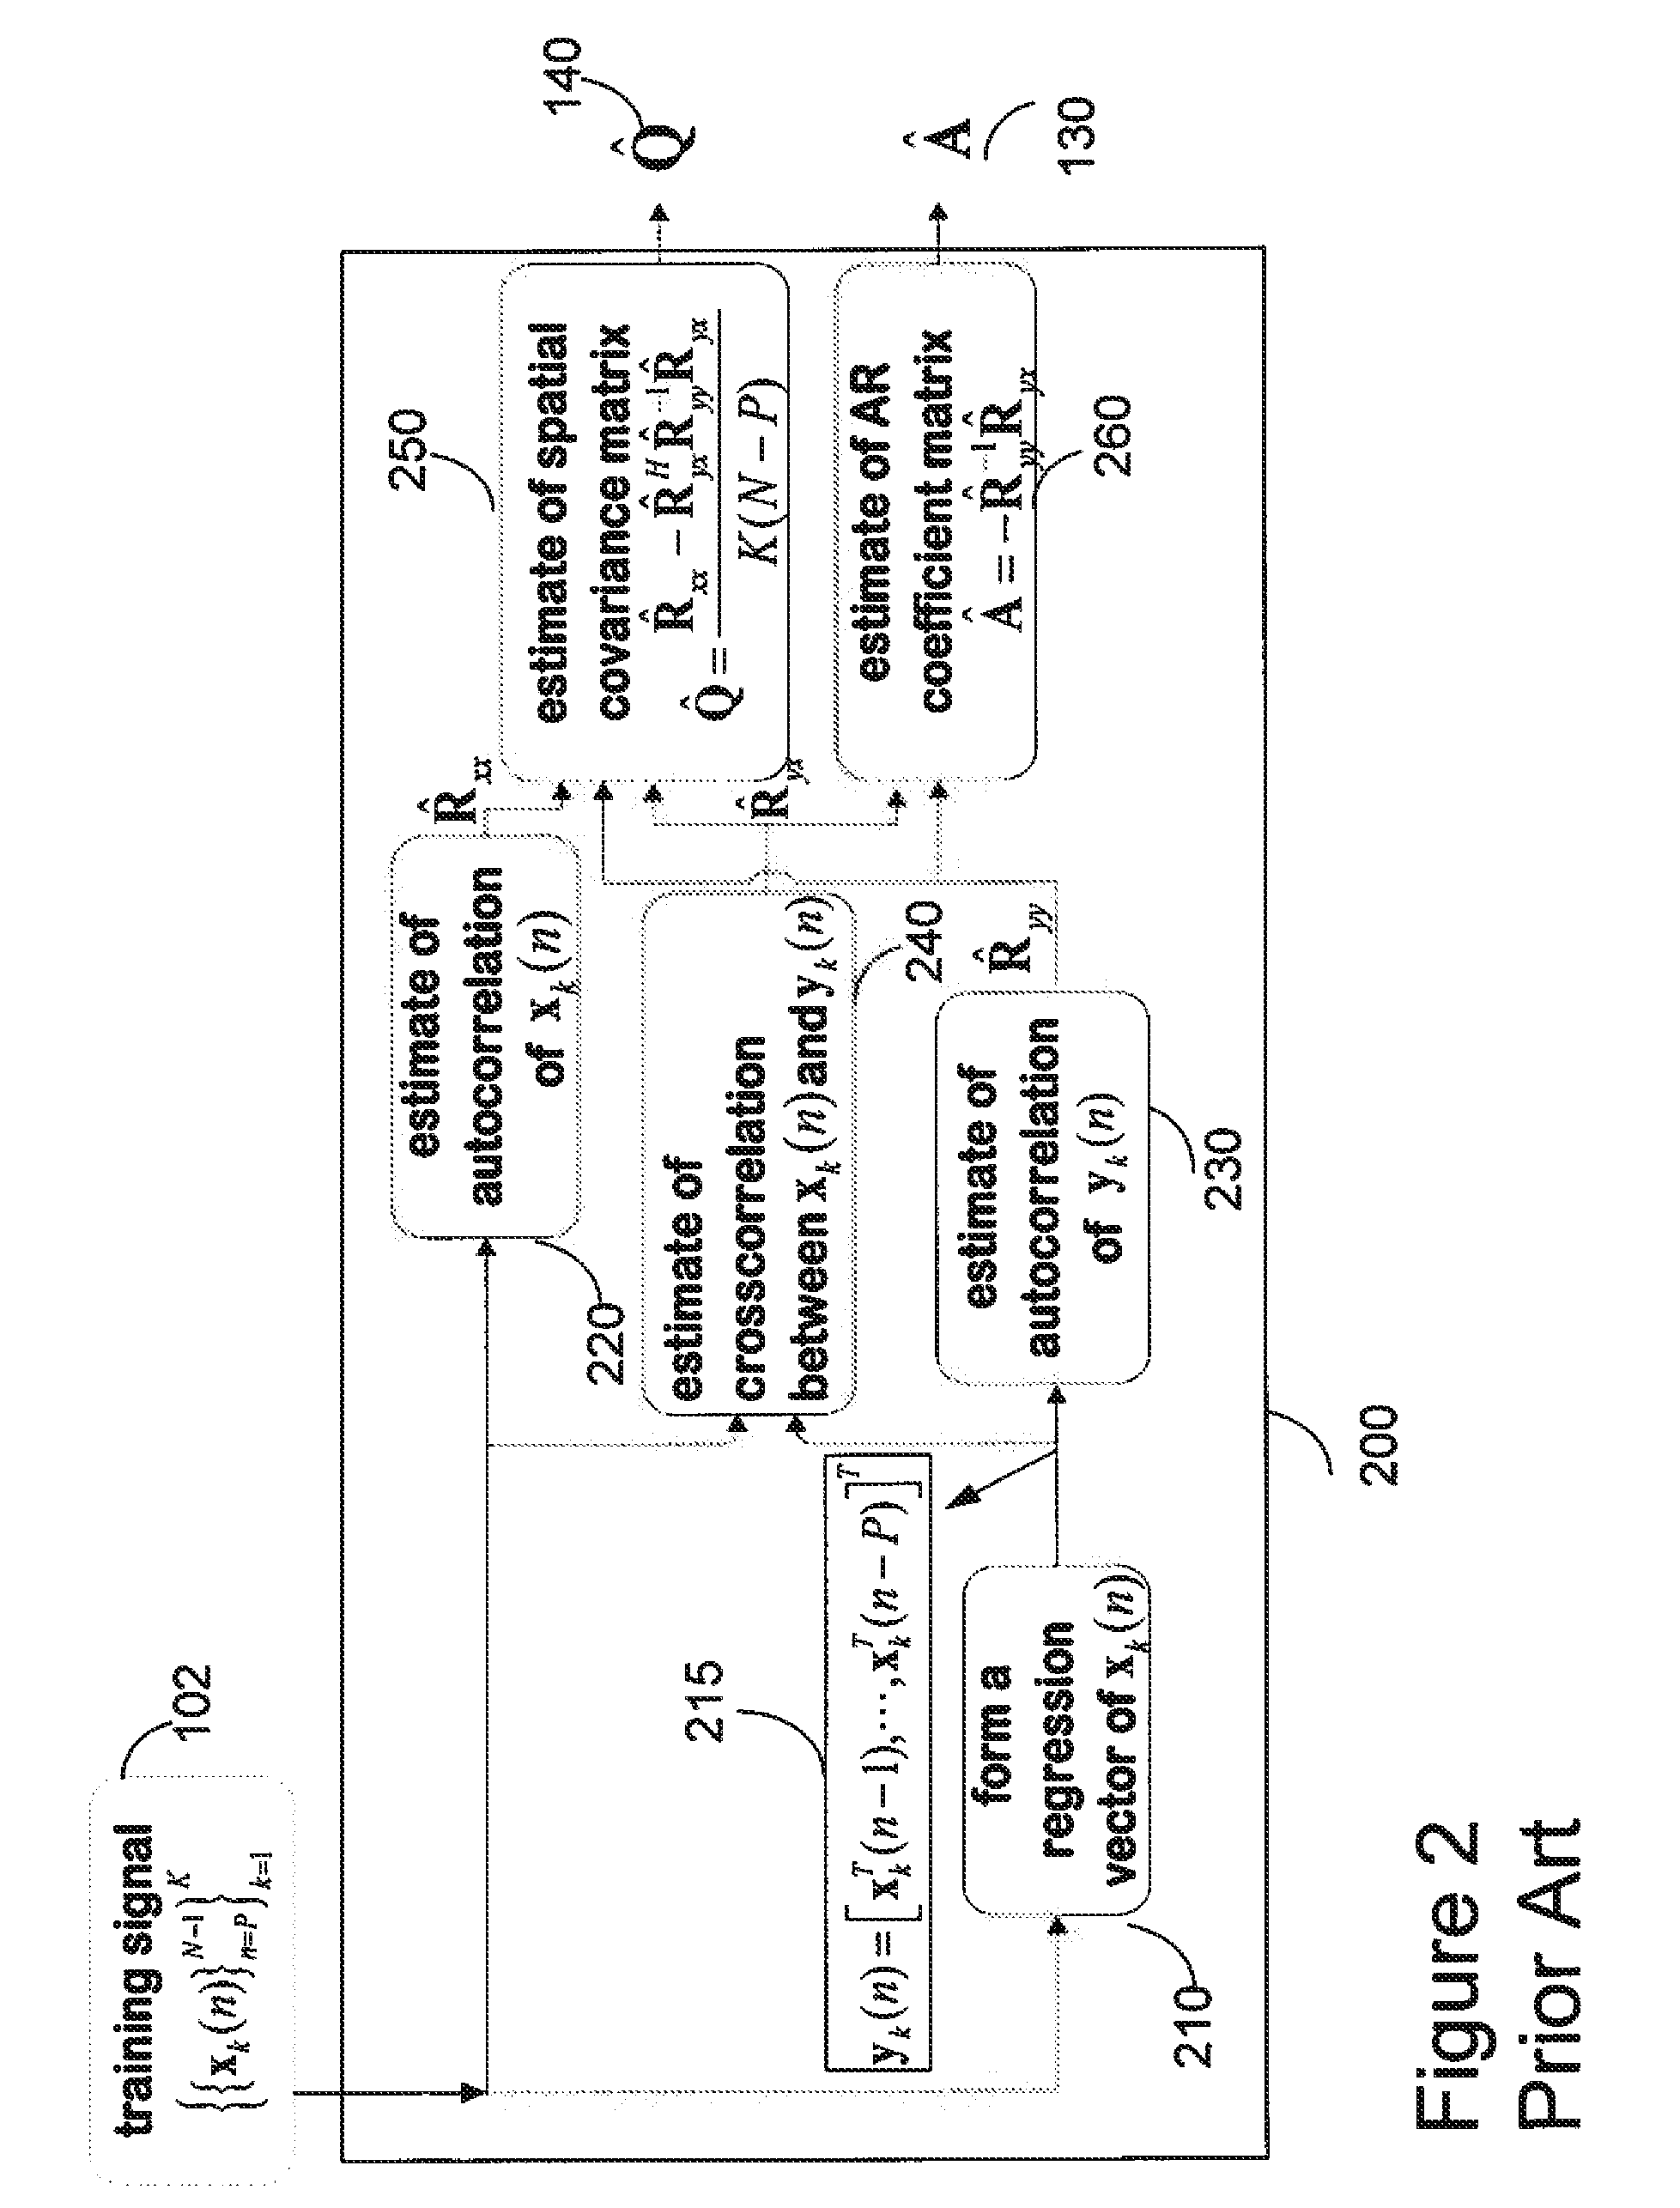 Persymmetric Parametric Adaptive Matched Filters for Detecting Targets Using Space-Time Adaptive Processing of Radar Signals